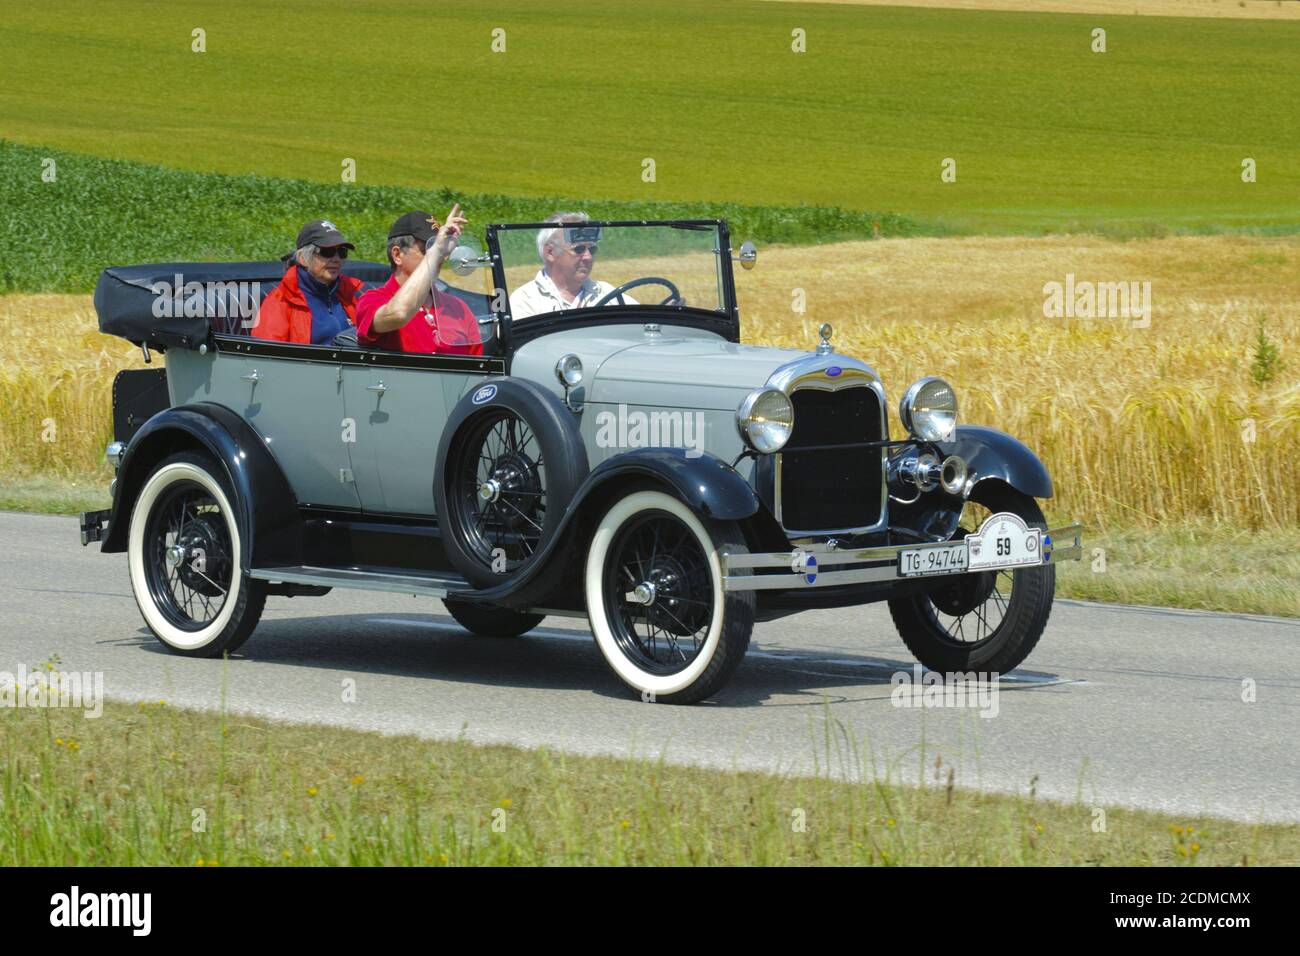 Oldtimer rally for old antique classic cars Stock Photo